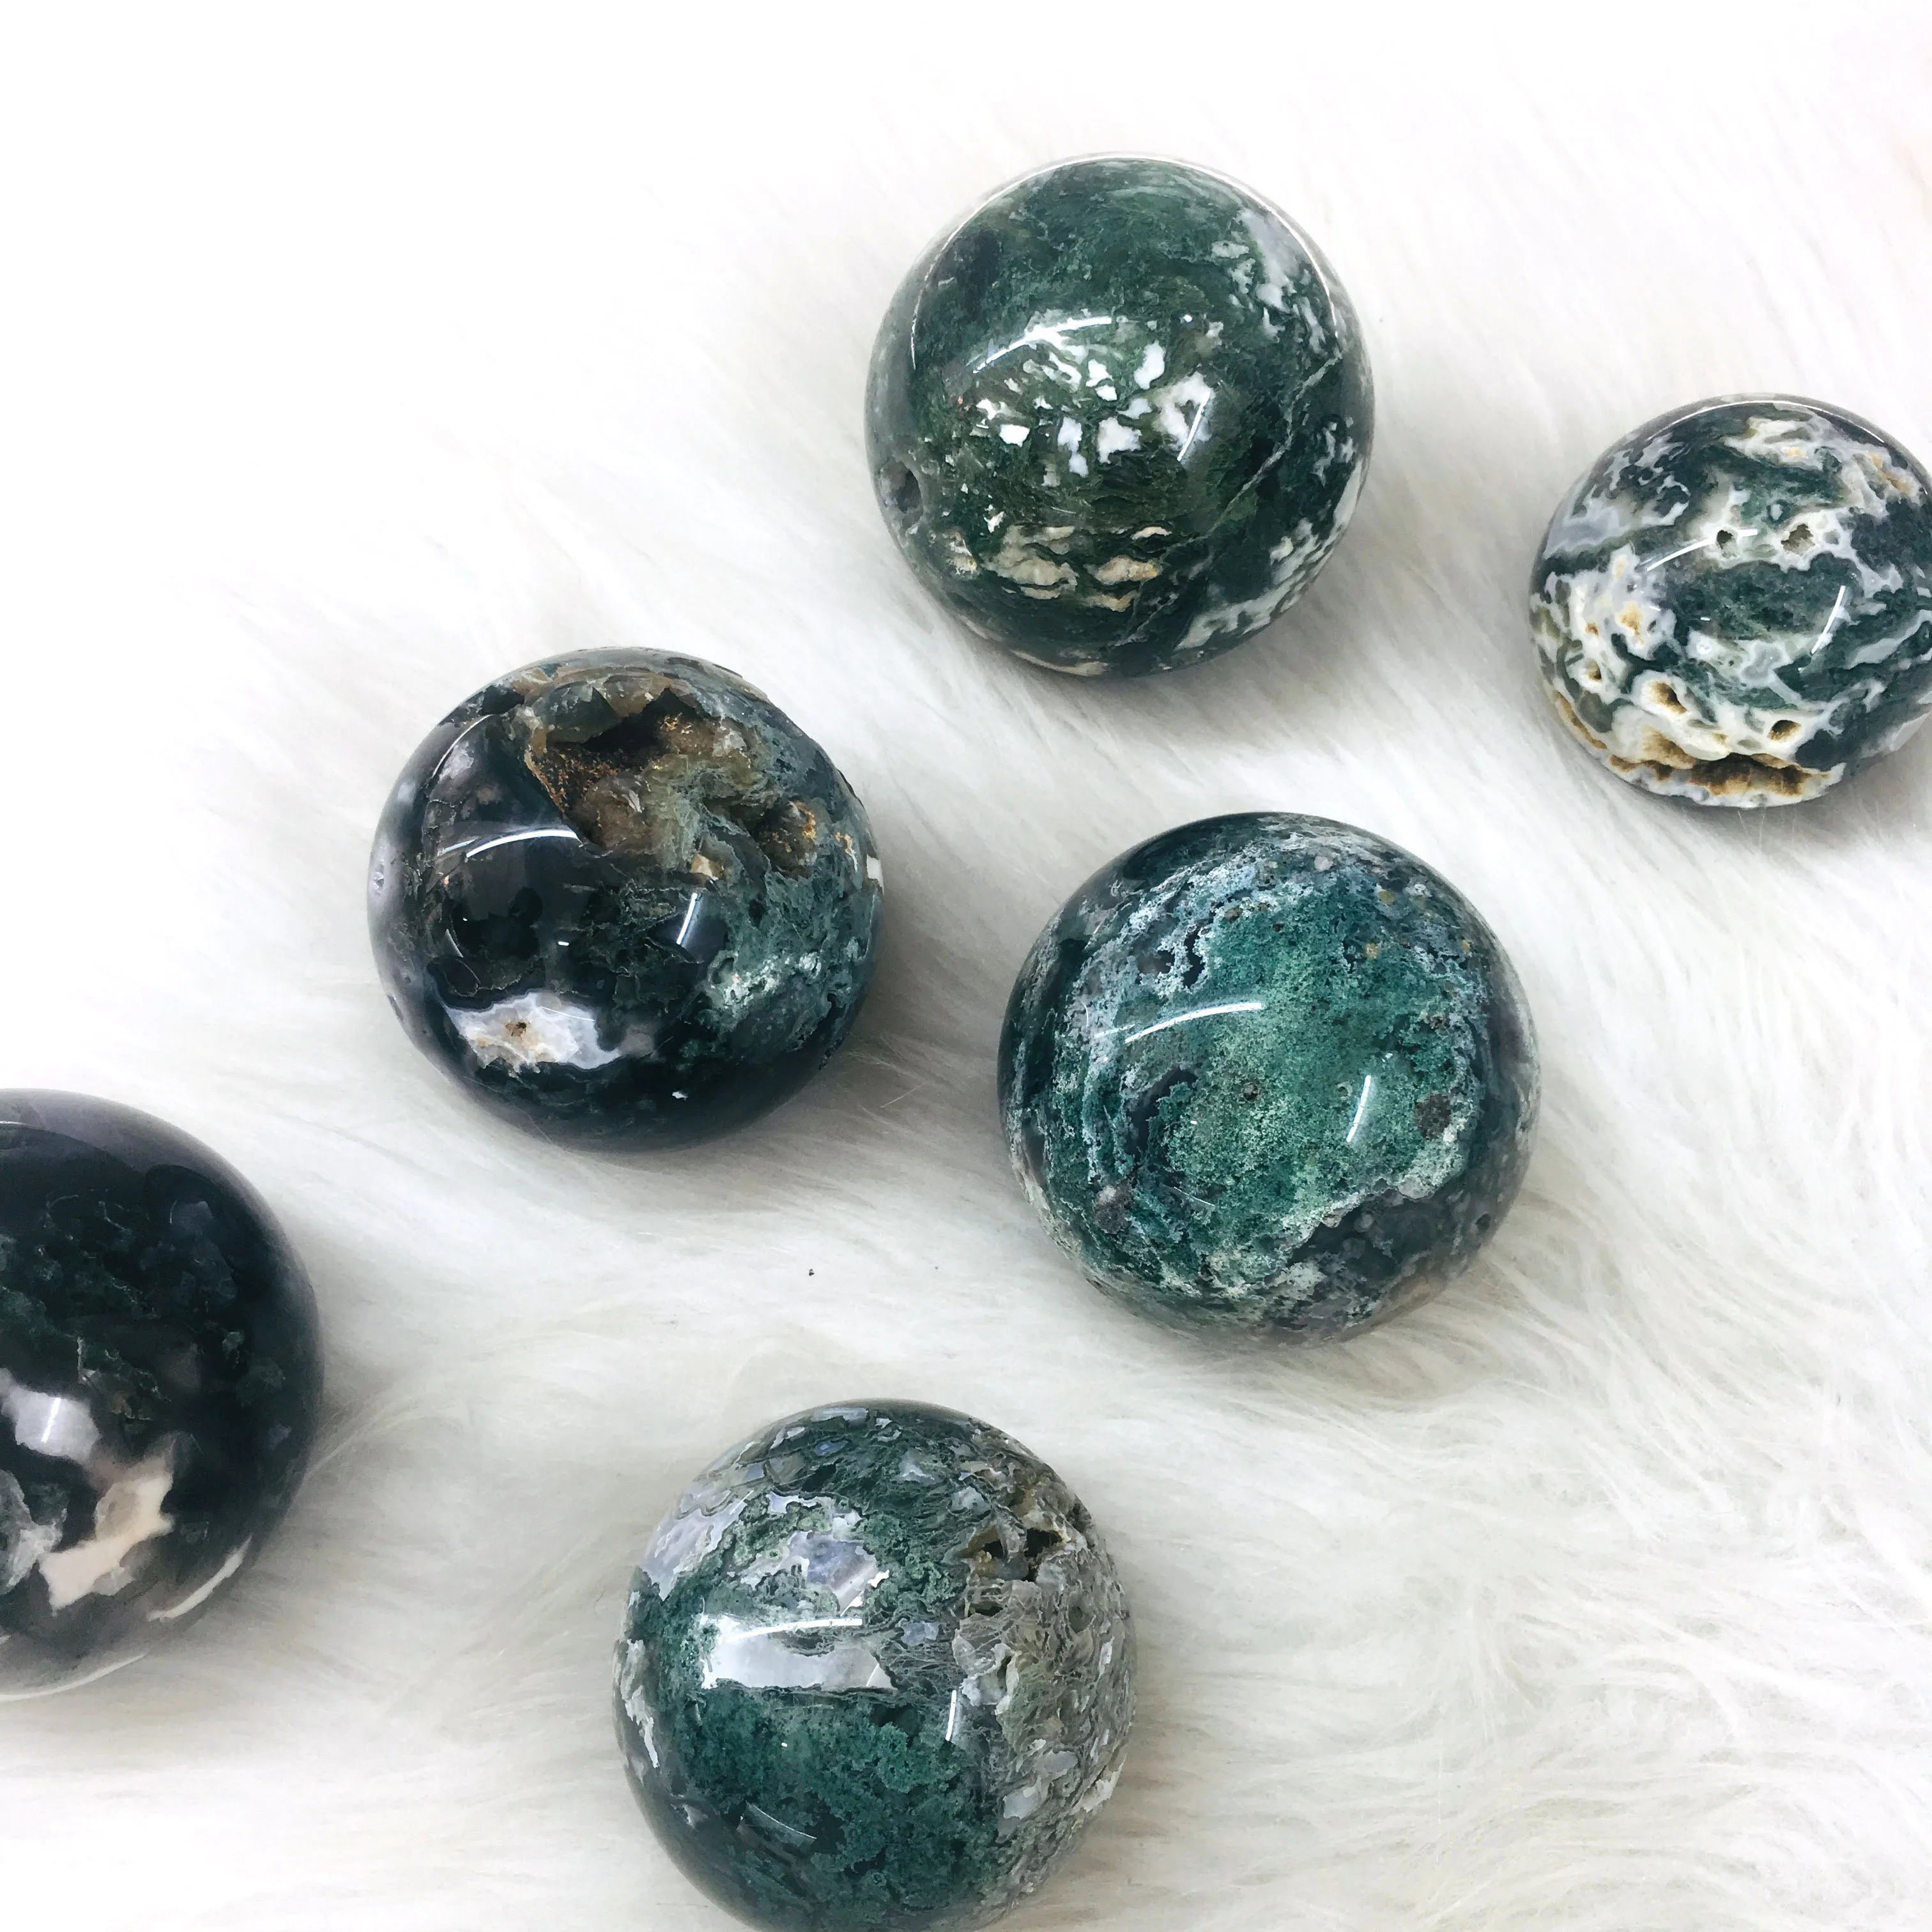 

Hot Sale Natural Quartz Crystal Sphere Moss Agate Ball Healing Stone For Home Decoration HML